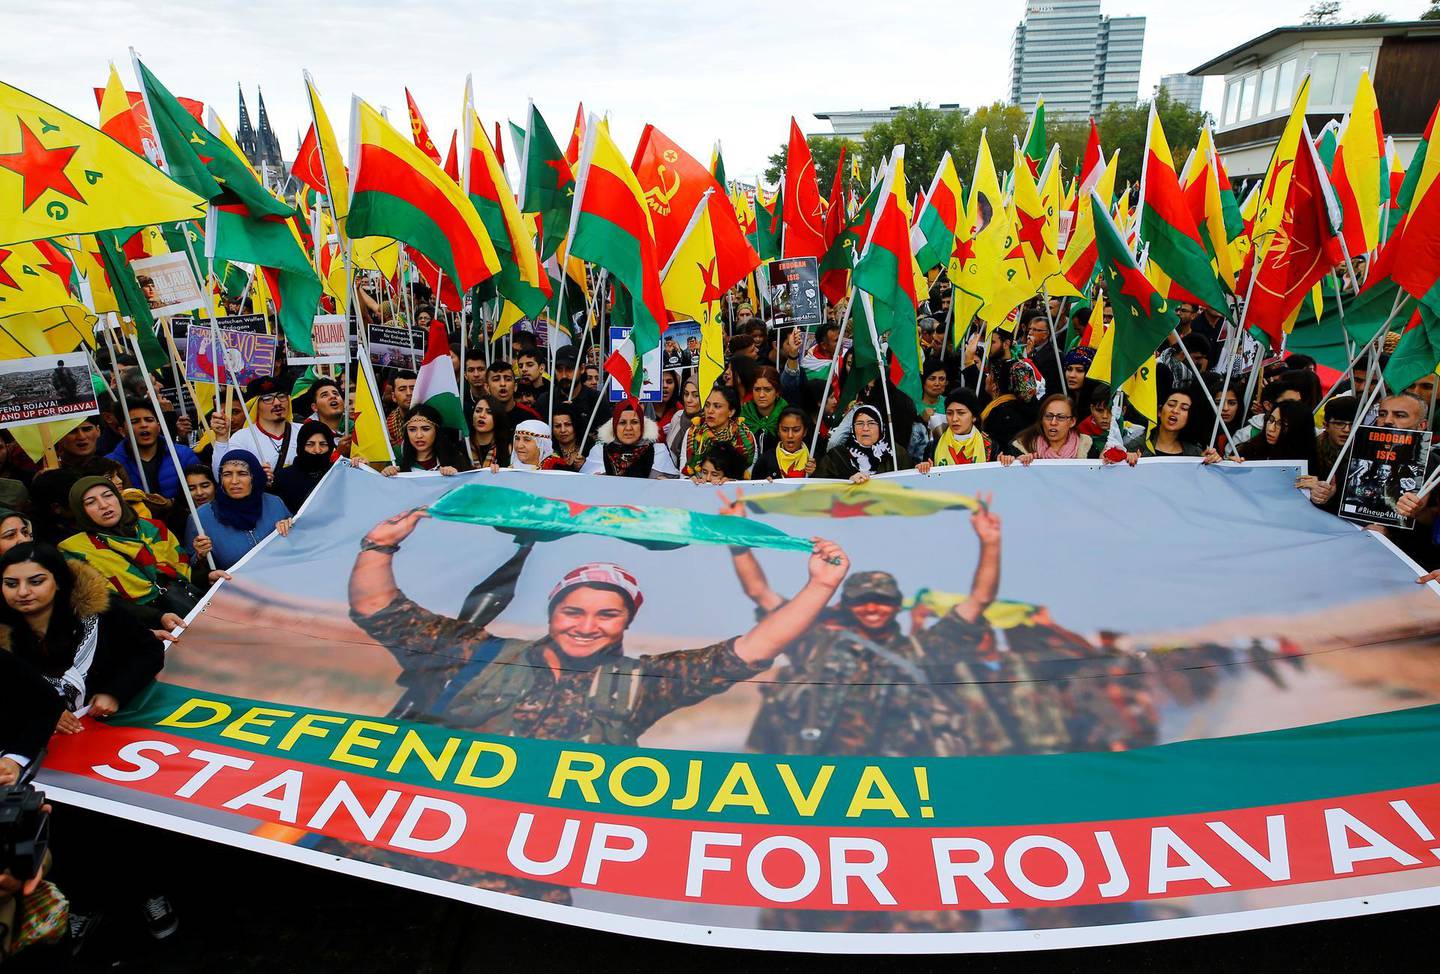 Kurdish protesters hold banner and flags at a demonstration against Turkey's military action in northeastern Syria, in Cologne, Germany, October 12, 2019. REUTERS/Thilo Schmuelgen